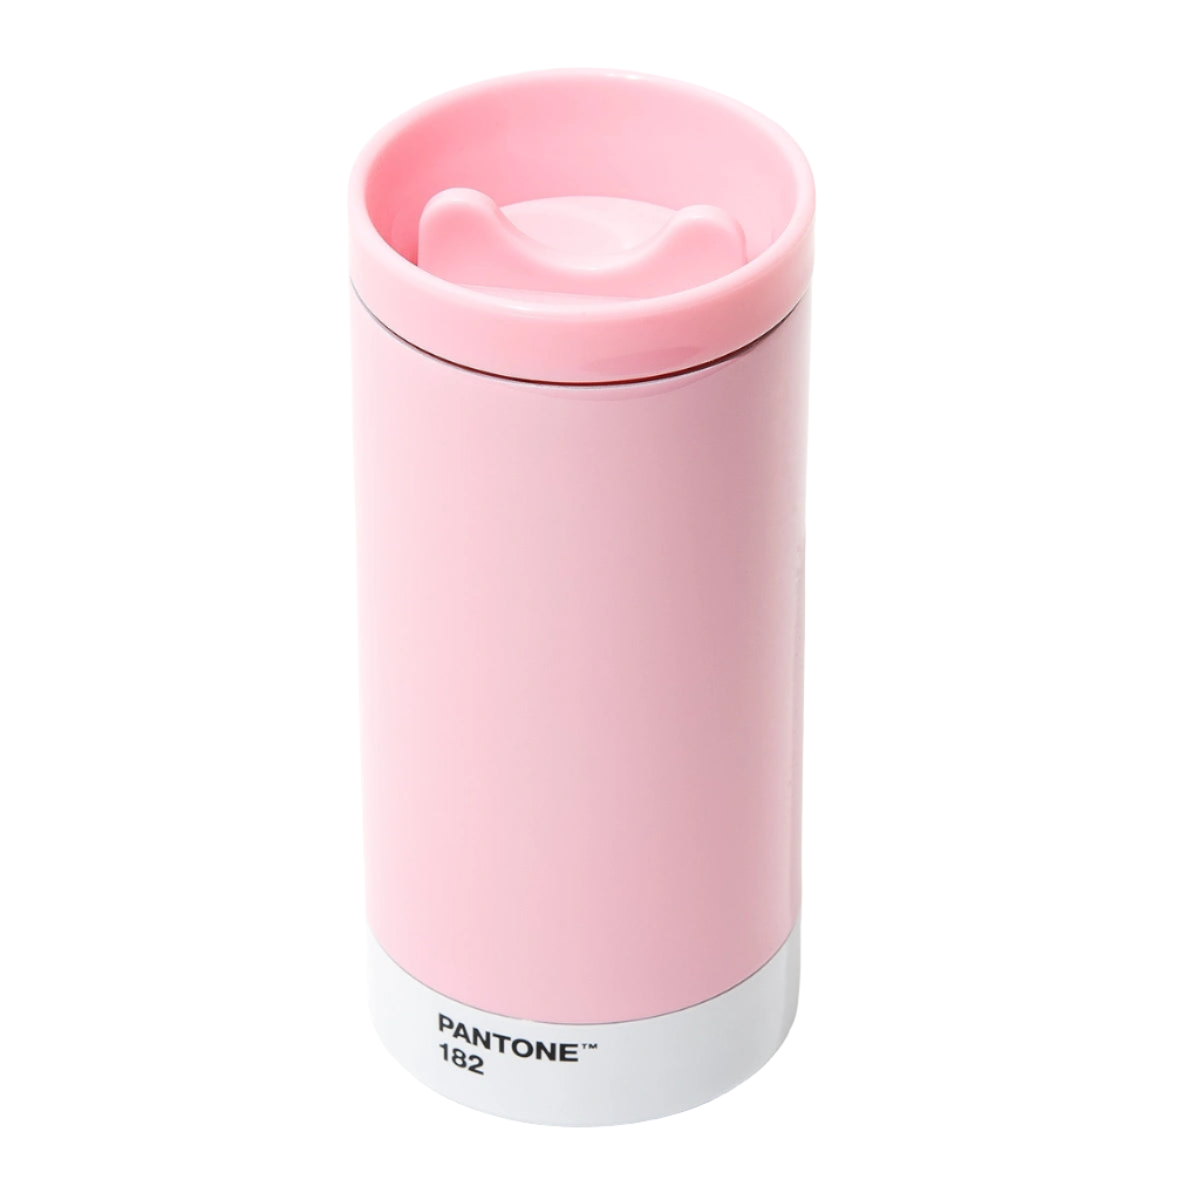 Pantone Pale Pink To-Go Cup